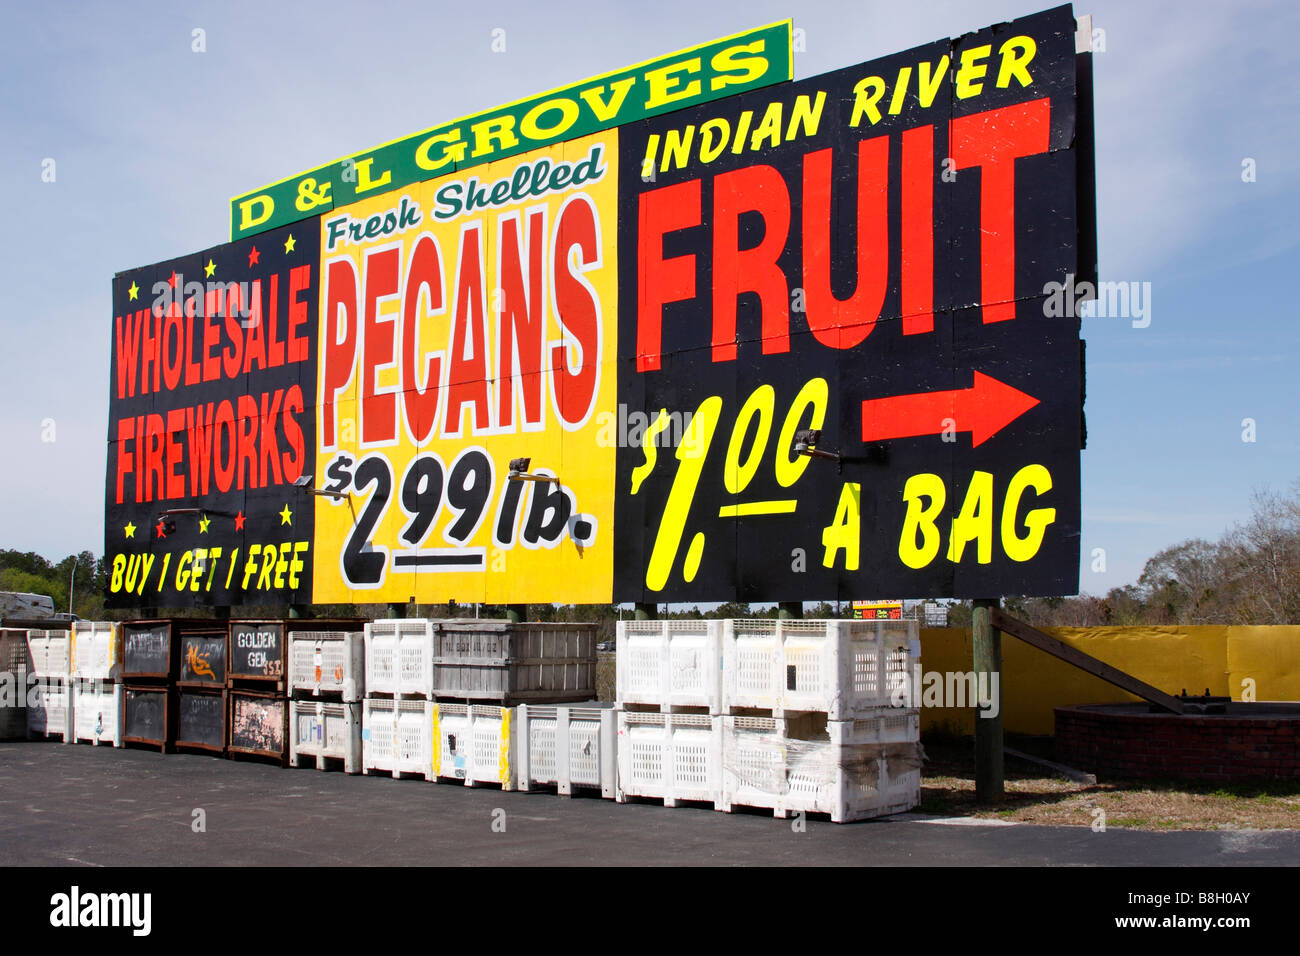 Fruit nuts and fireworks stand off of Interstate 95, Georgia USA Stock Photo